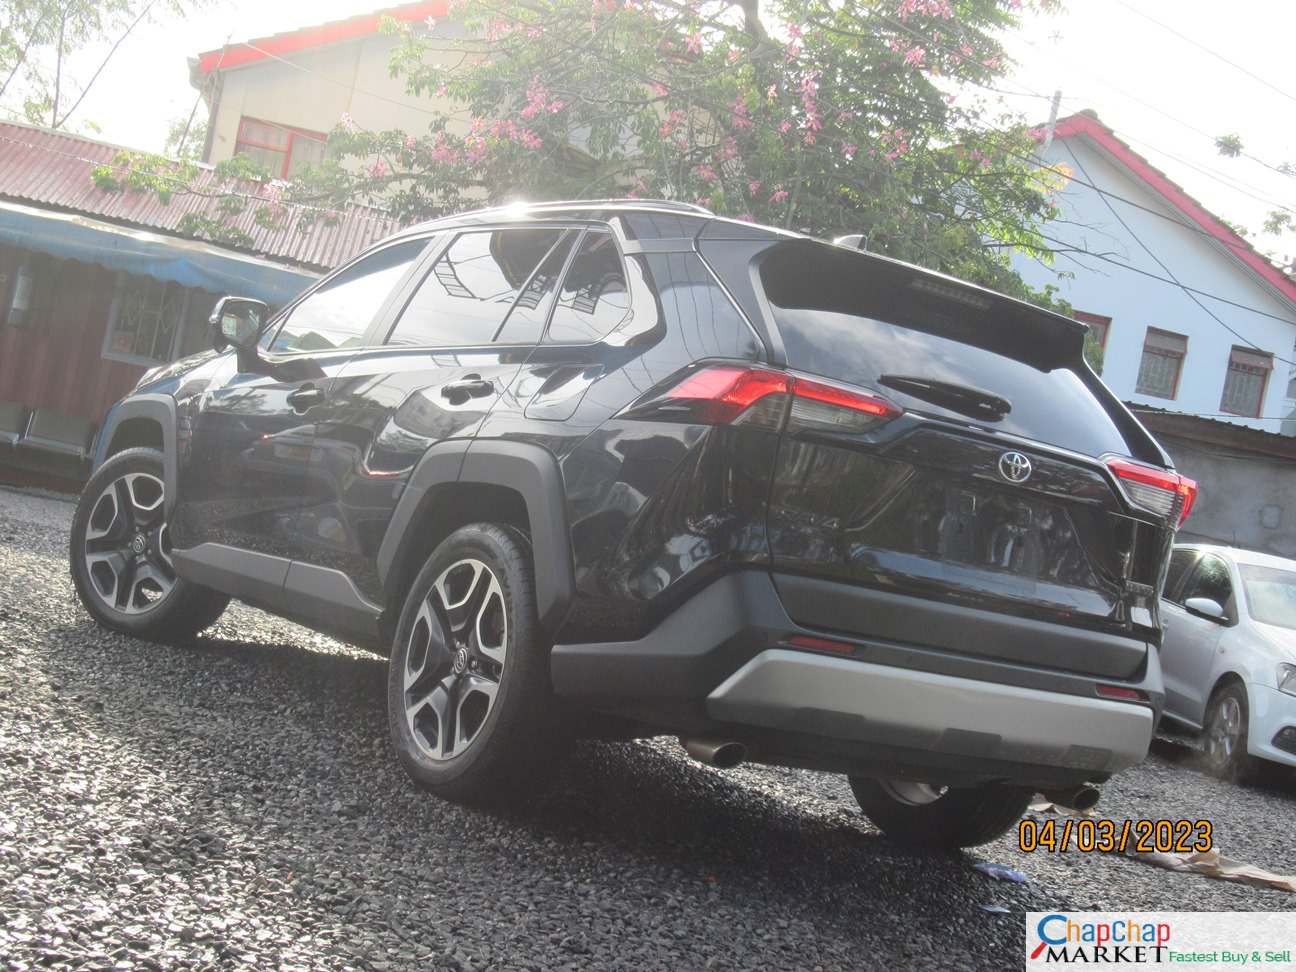 Cars Cars For Sale/Vehicles-Toyota RAV4 2019 Double sunroof CHEAPEST You Pay 30% Deposit Trade in OK 5